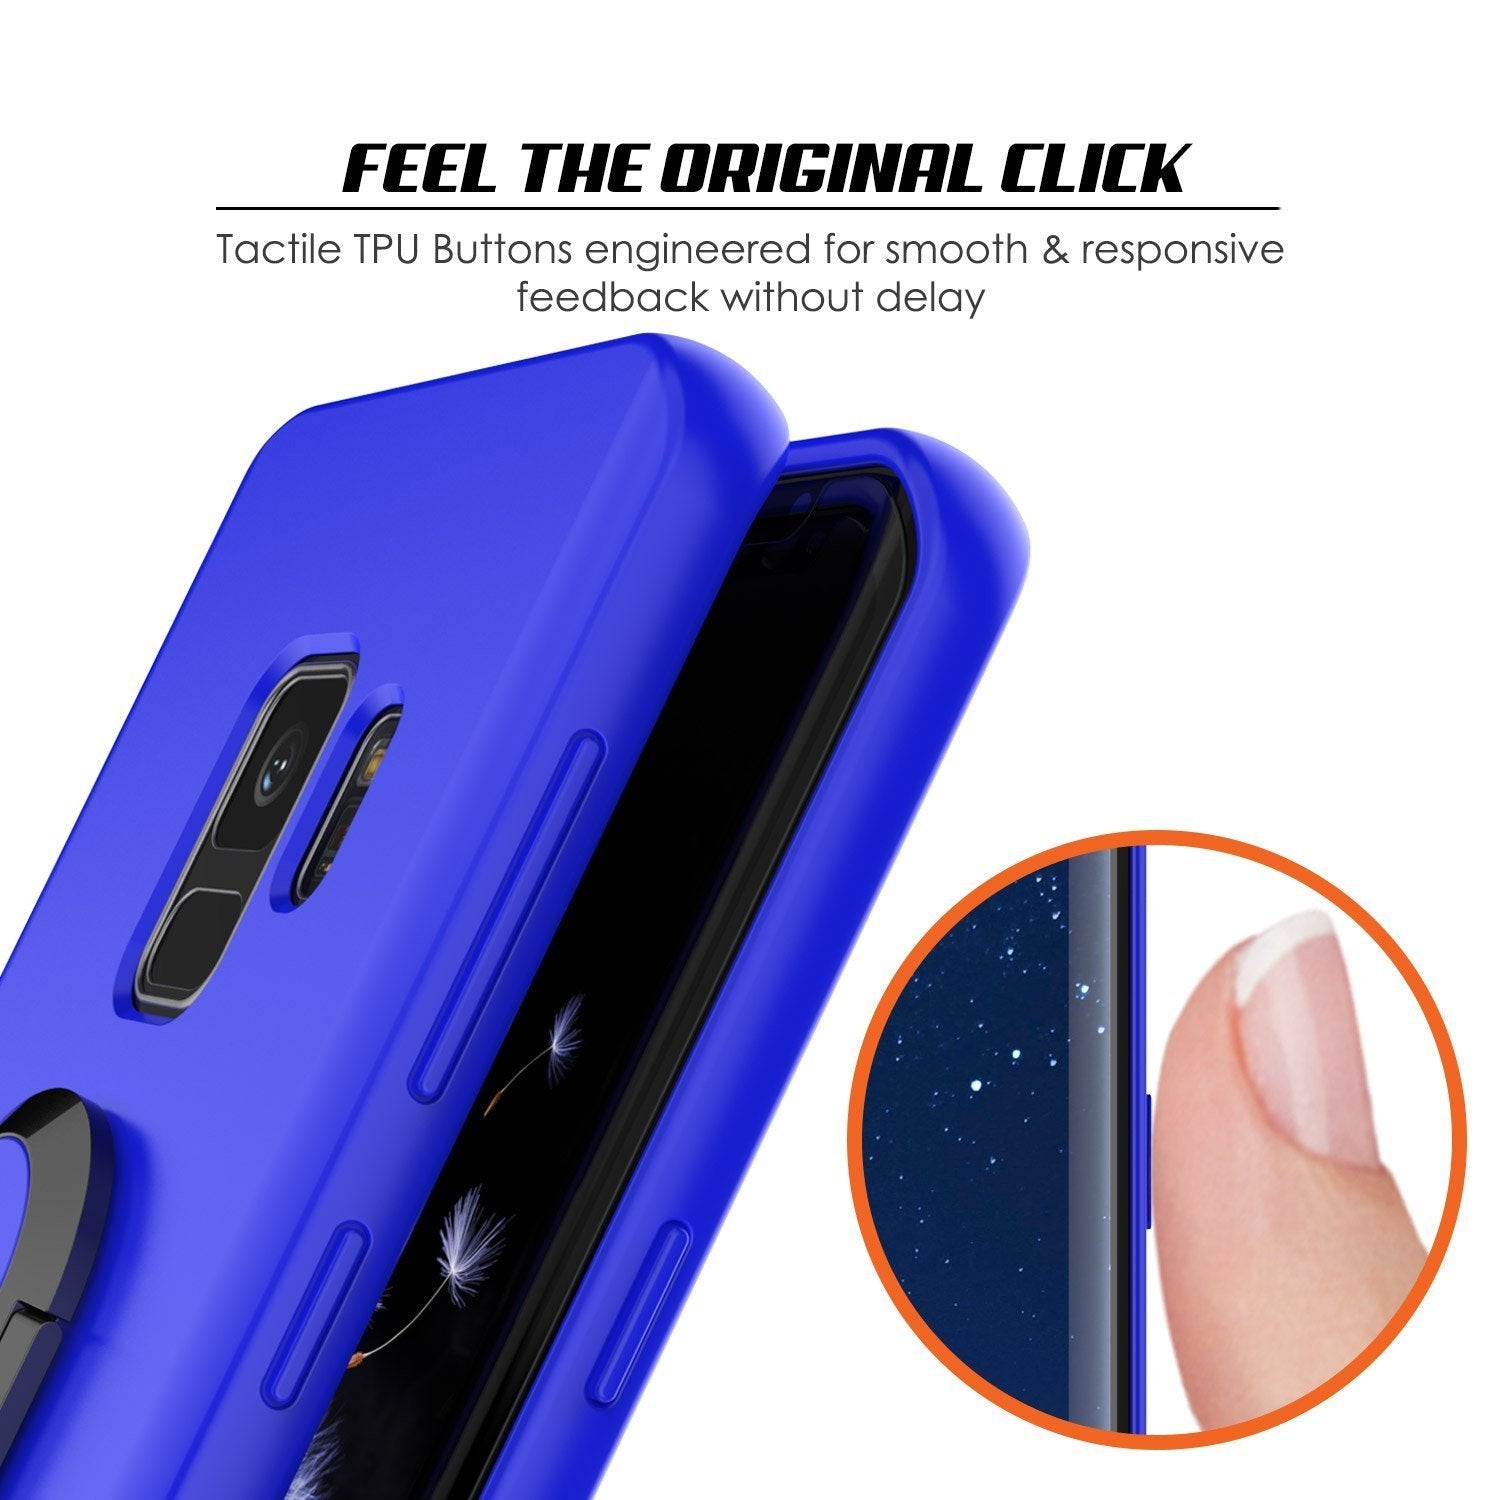 Galaxy S9 Case, Punkcase Magnetix Protective TPU Cover W/ Kickstand, Ring Grip Holder & Metal Plate for Magnetic Car Phone Mount PLUS PunkShield Screen Protector for Samsung S9 Edge [Blue]